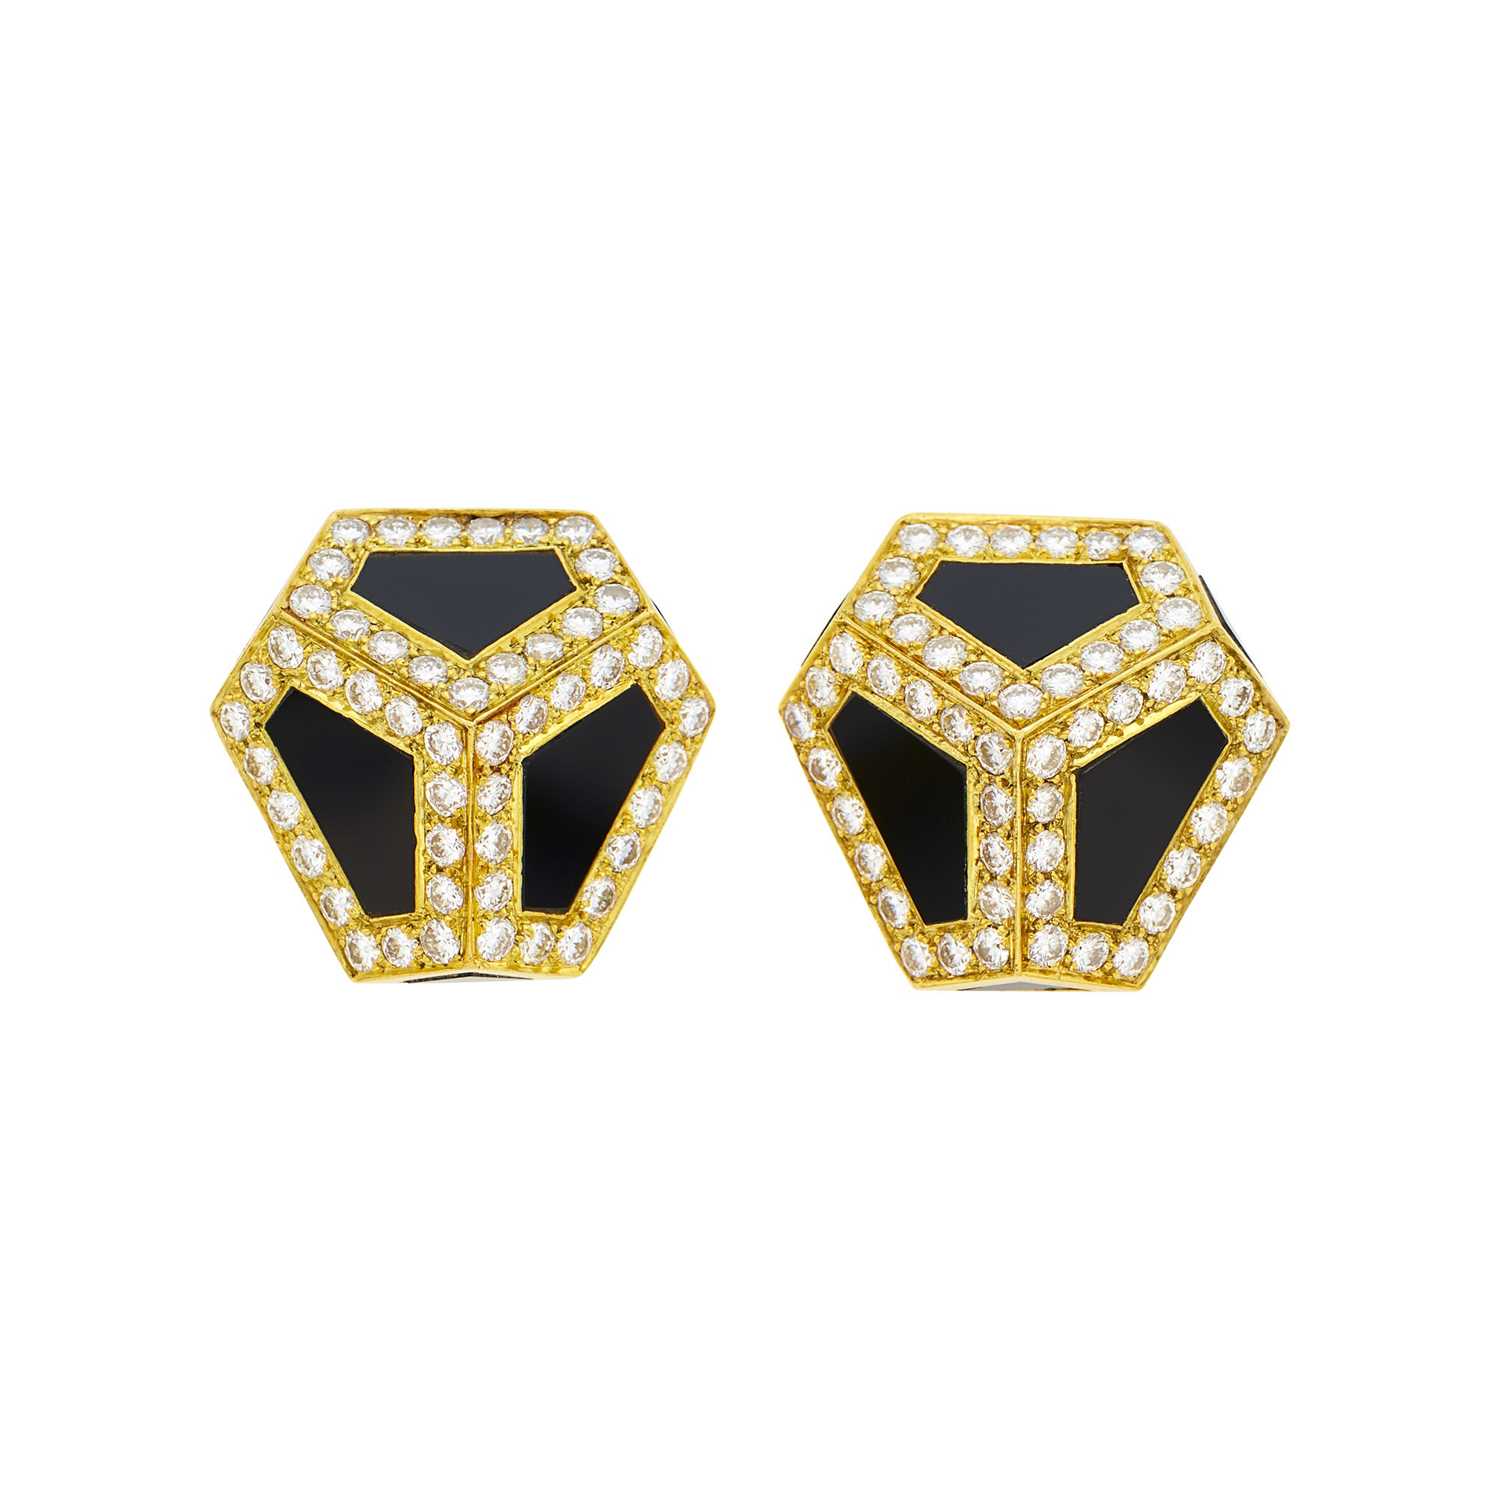 Lot 123 - Pair of Gold, Black Onyx and Diamond Earclips